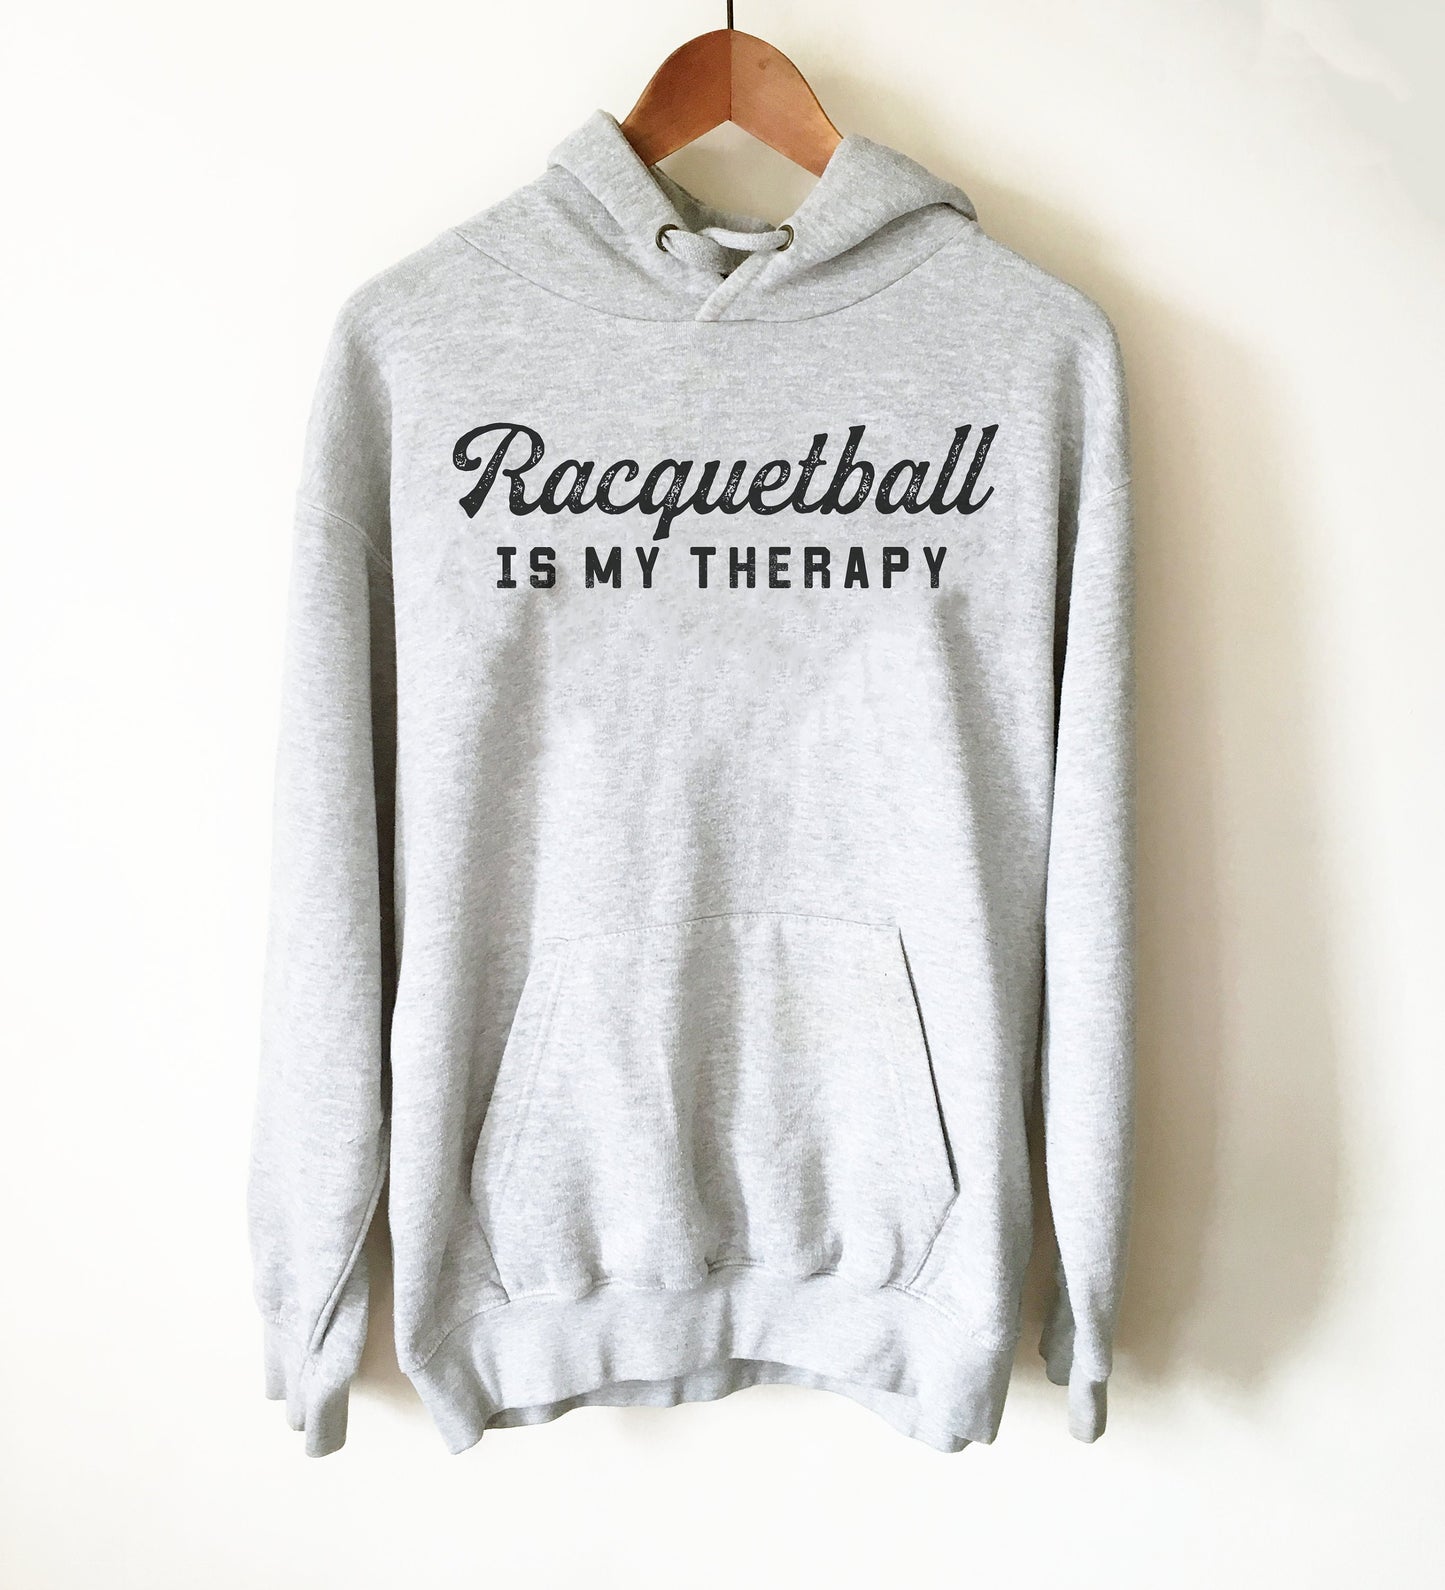 Racquetball Is My Therapy Hoodie - Racquetball Shirt, Racquetball Gift, Racquetball Player Shirt, Racquets Shirt, Racquets Gift